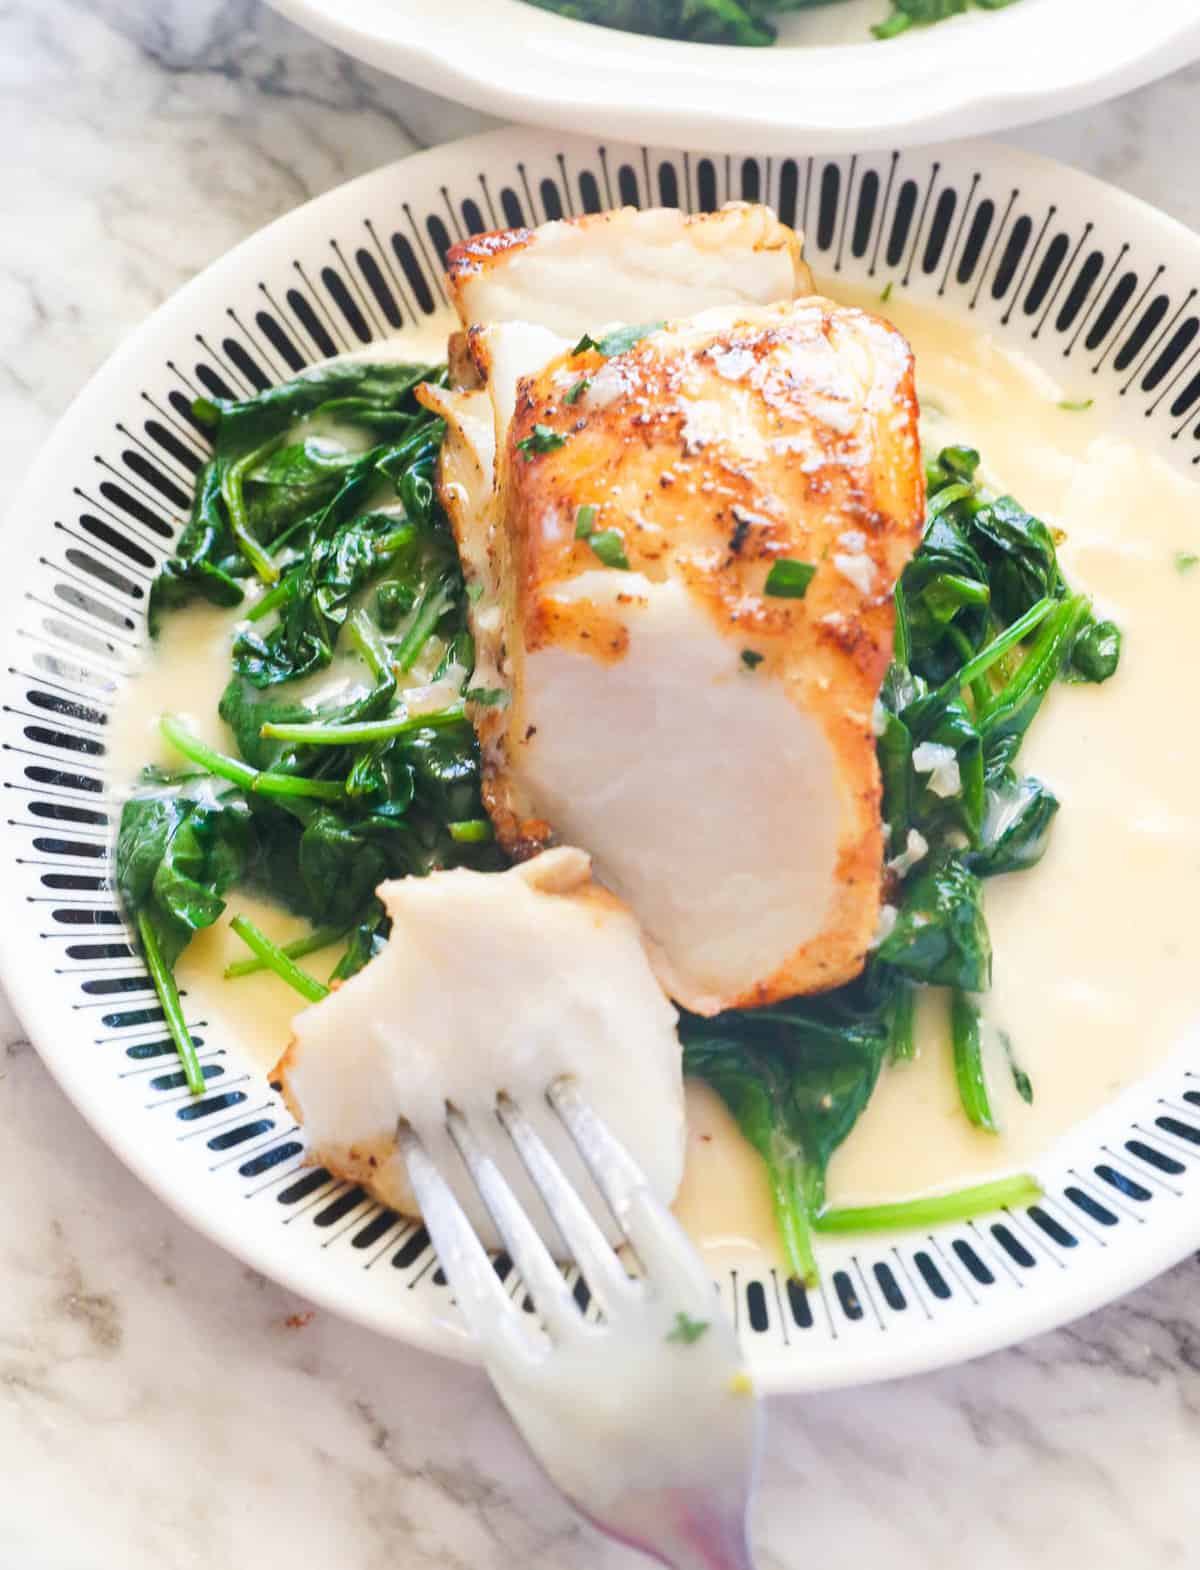 Enjoy Chilean Sea Bass with beurre blanc